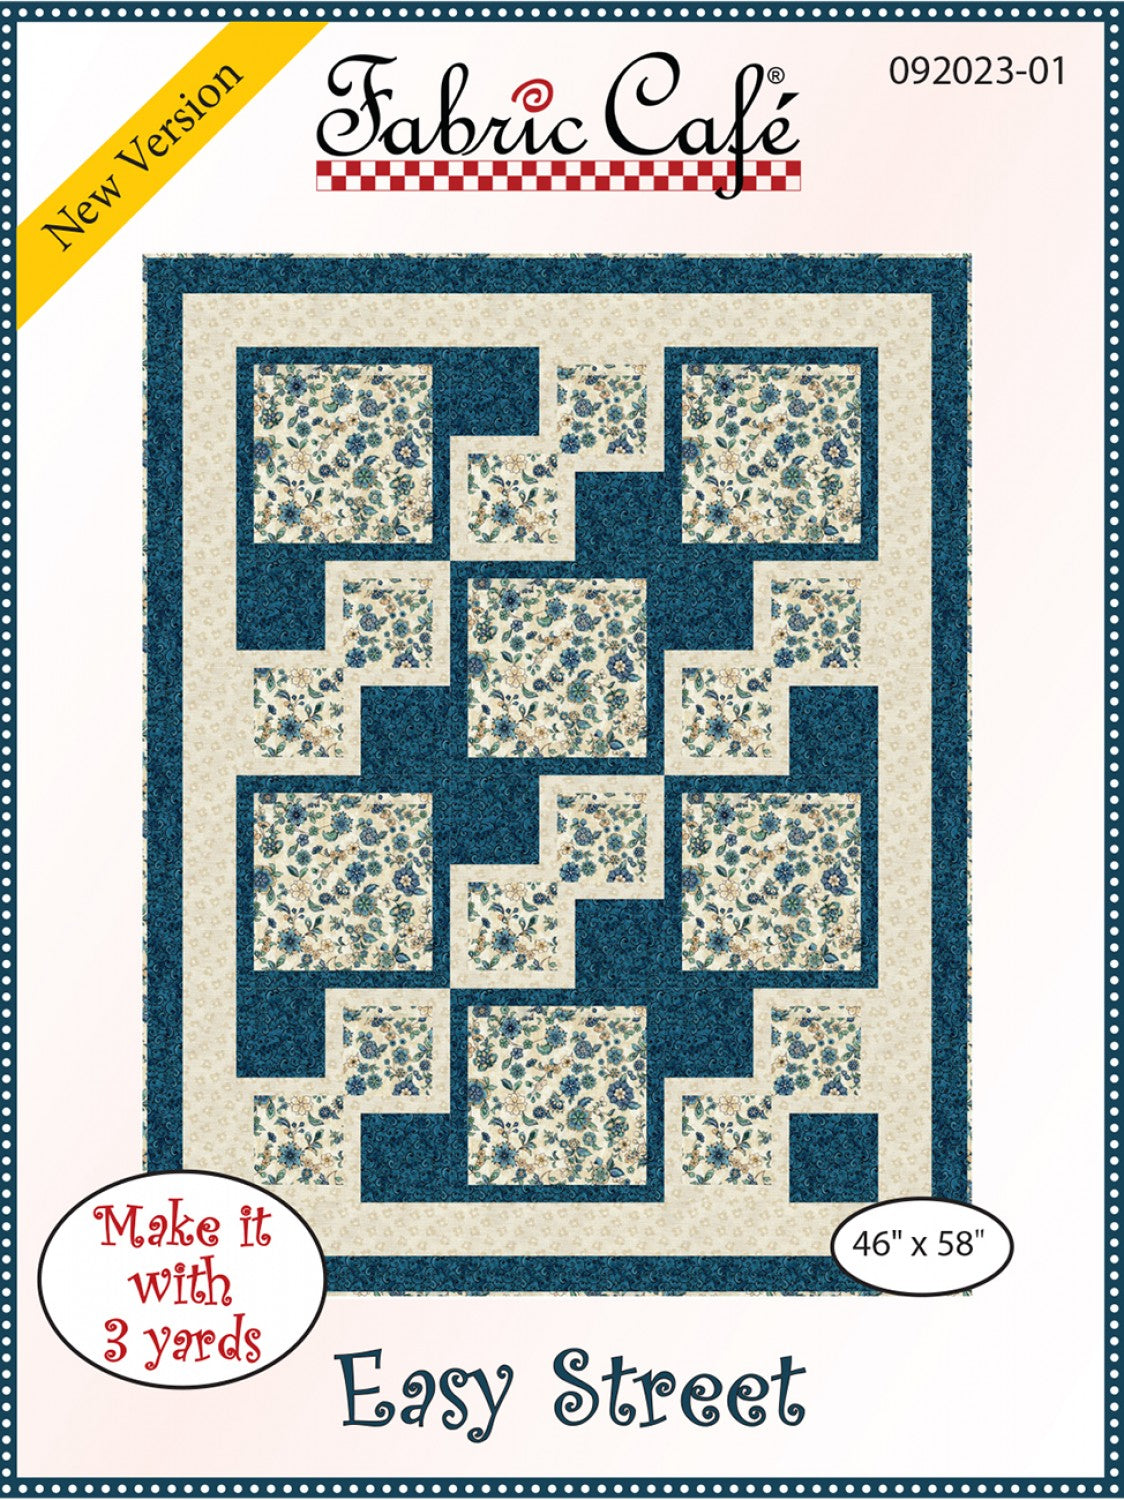 Easy Street - Quilt Pattern - Fabric Cafe